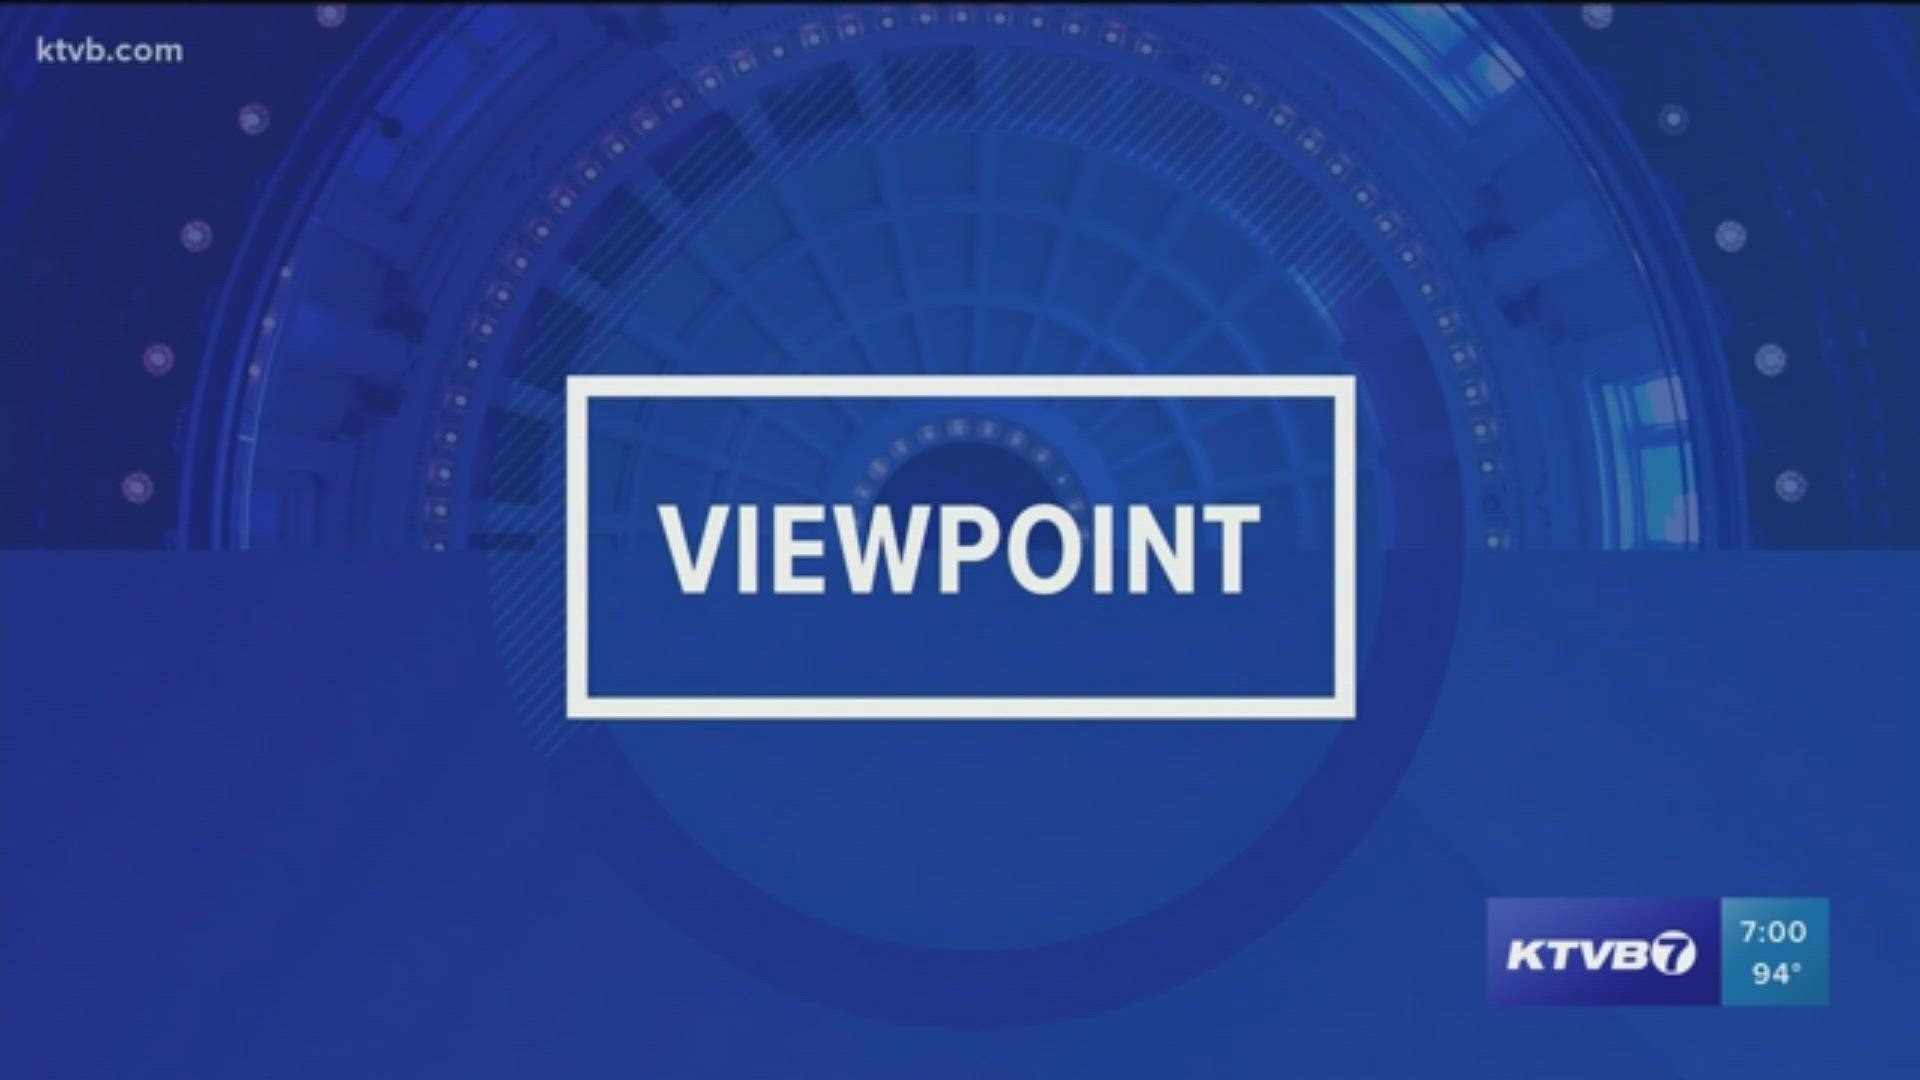 In this July 16 special "Back to School 2020" edition of Viewpoint, KTVB's Mark Johnson will be tackling topics and viewer questions regarding back to school.